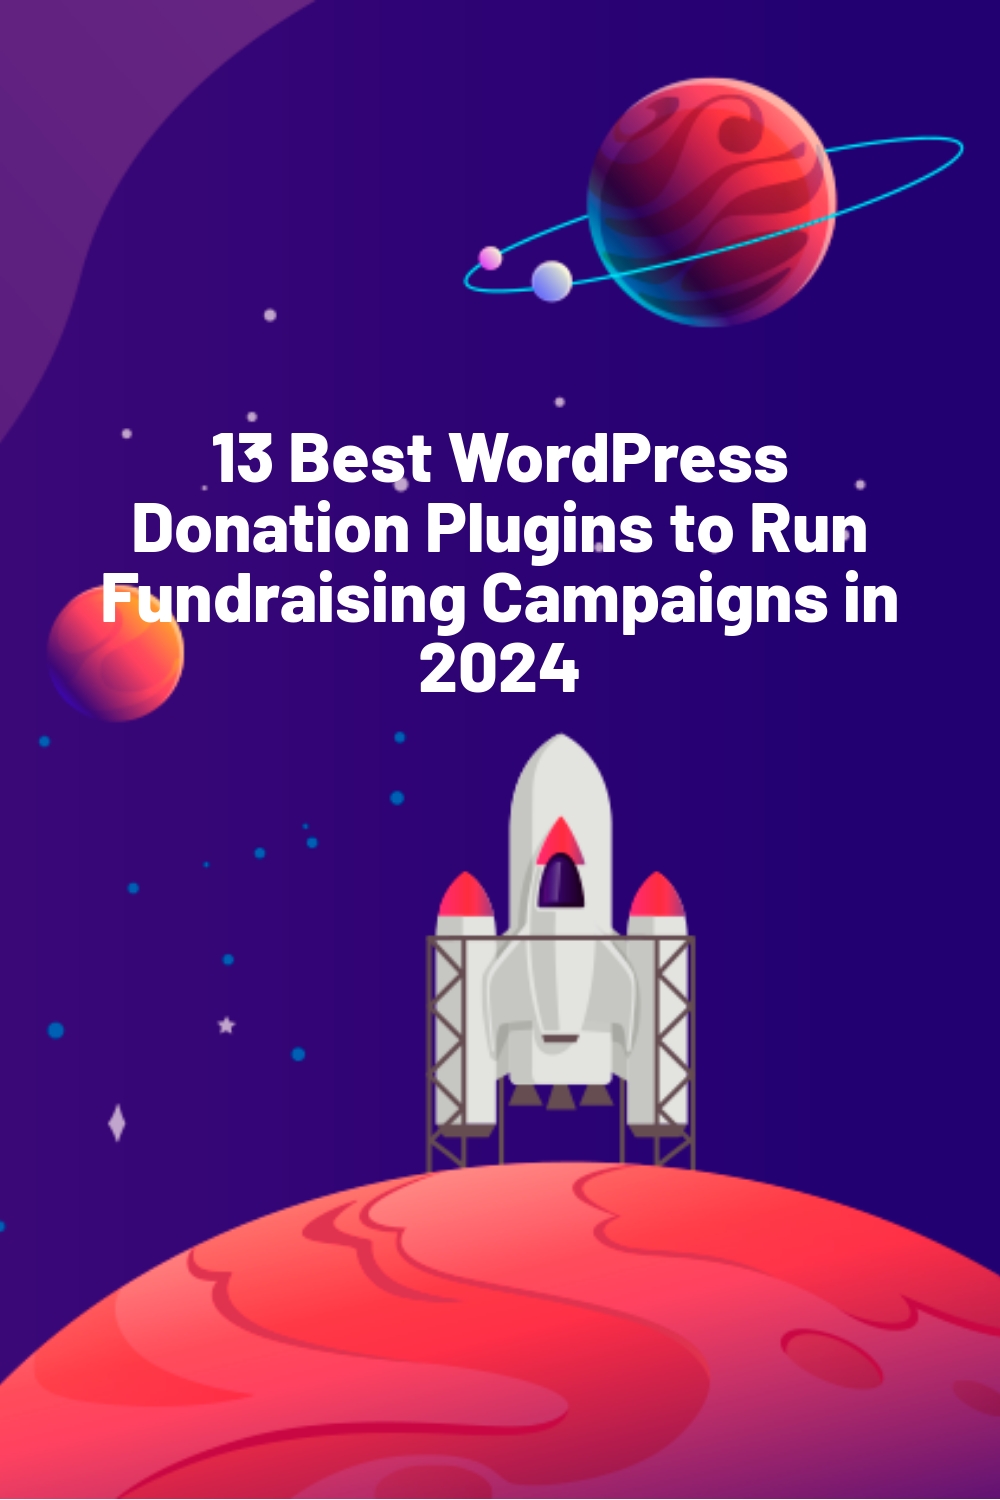 13 Best WordPress Donation Plugins to Run Fundraising Campaigns in 2024